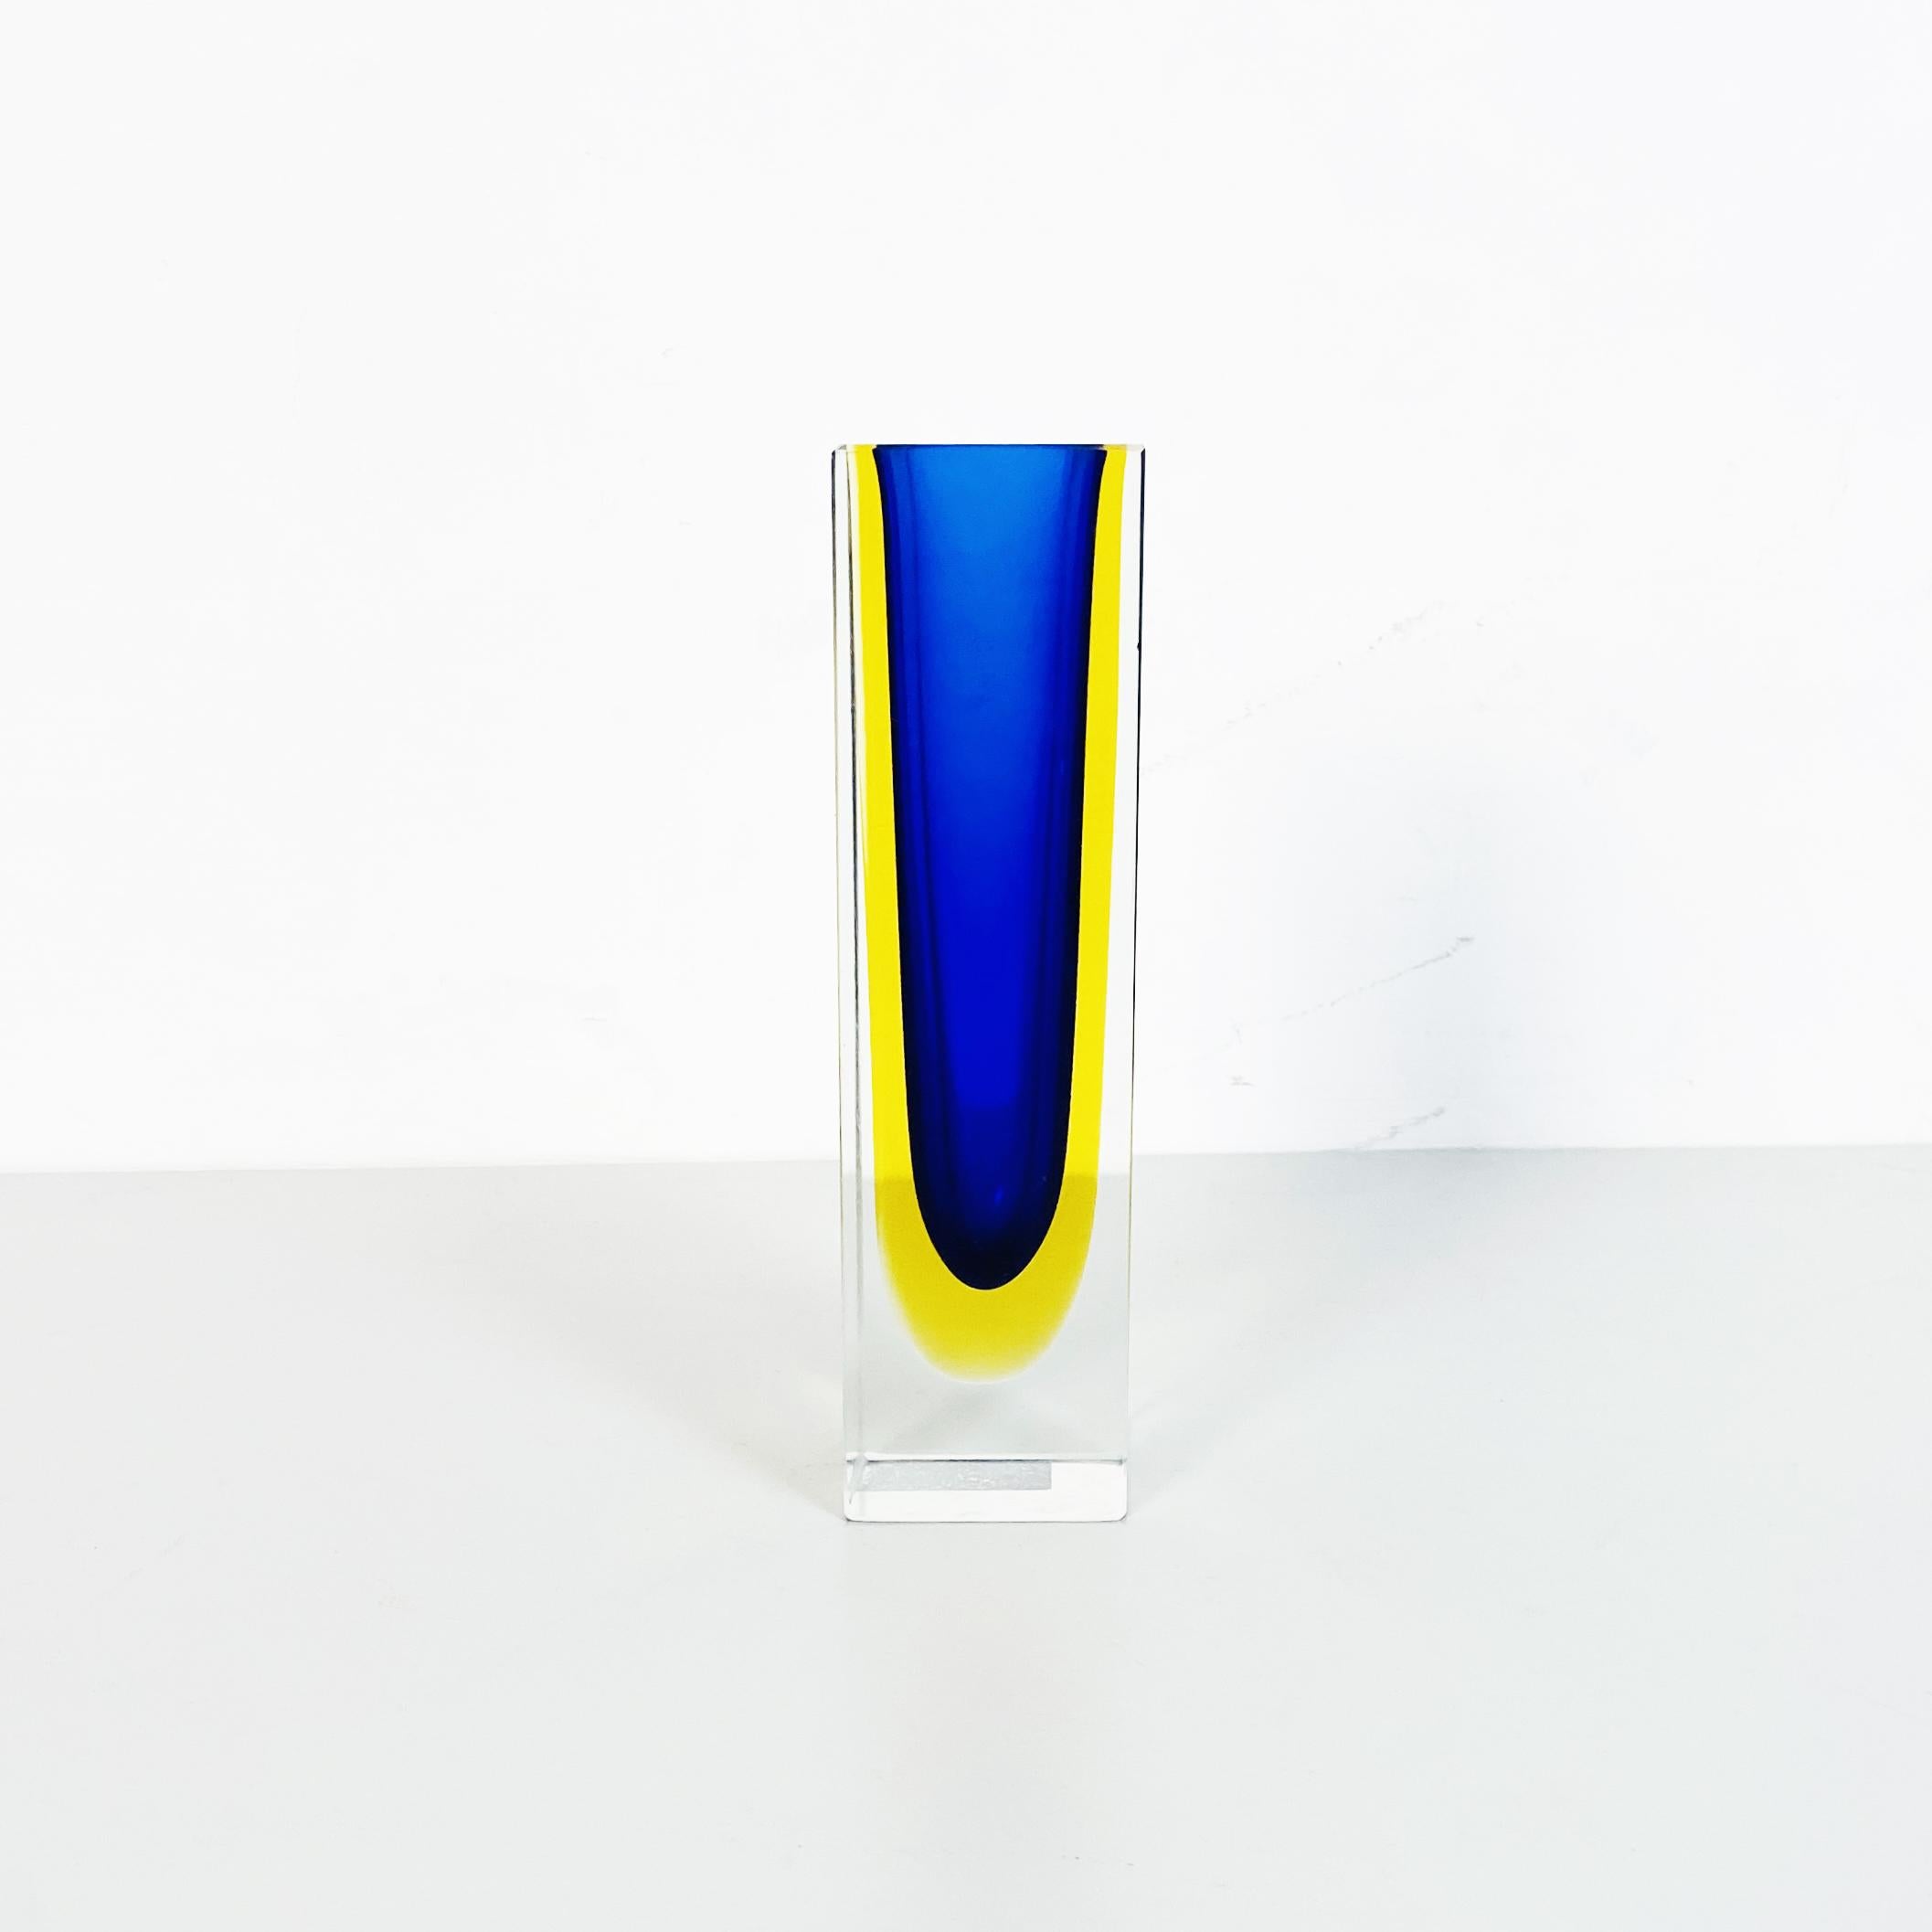 Italian mid-century Blue Murano glass vase with internal yellow shades, 1970s
Blue Murano glass vase with internal yellow shades. From the I Sommersi series.

This Fantastic series of Murano glass vase with various colored shades, is the 